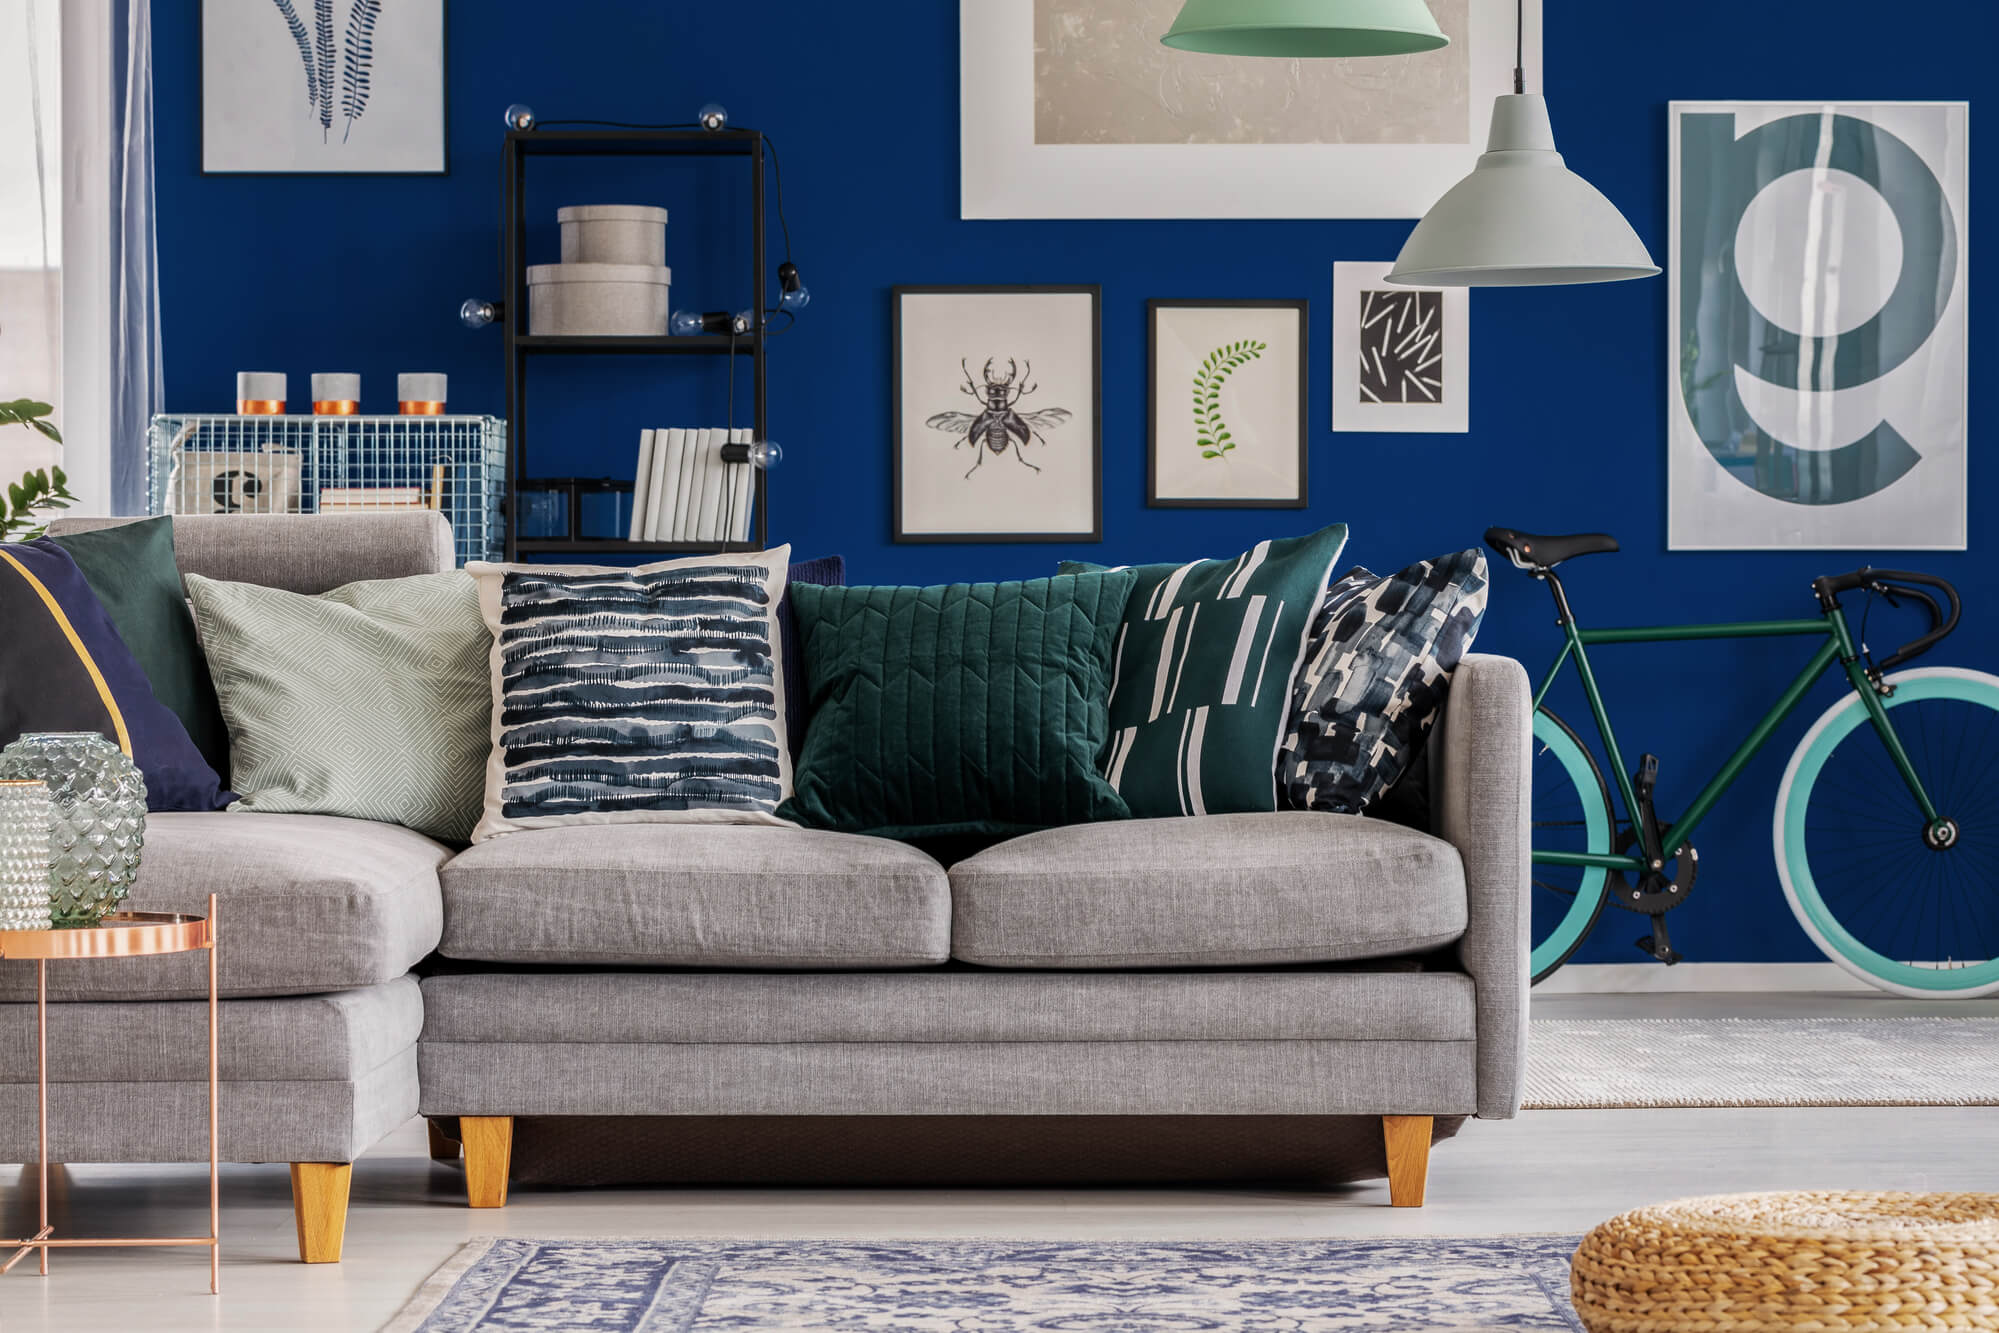 Beat winter blues with this Cheerful Paint Colors